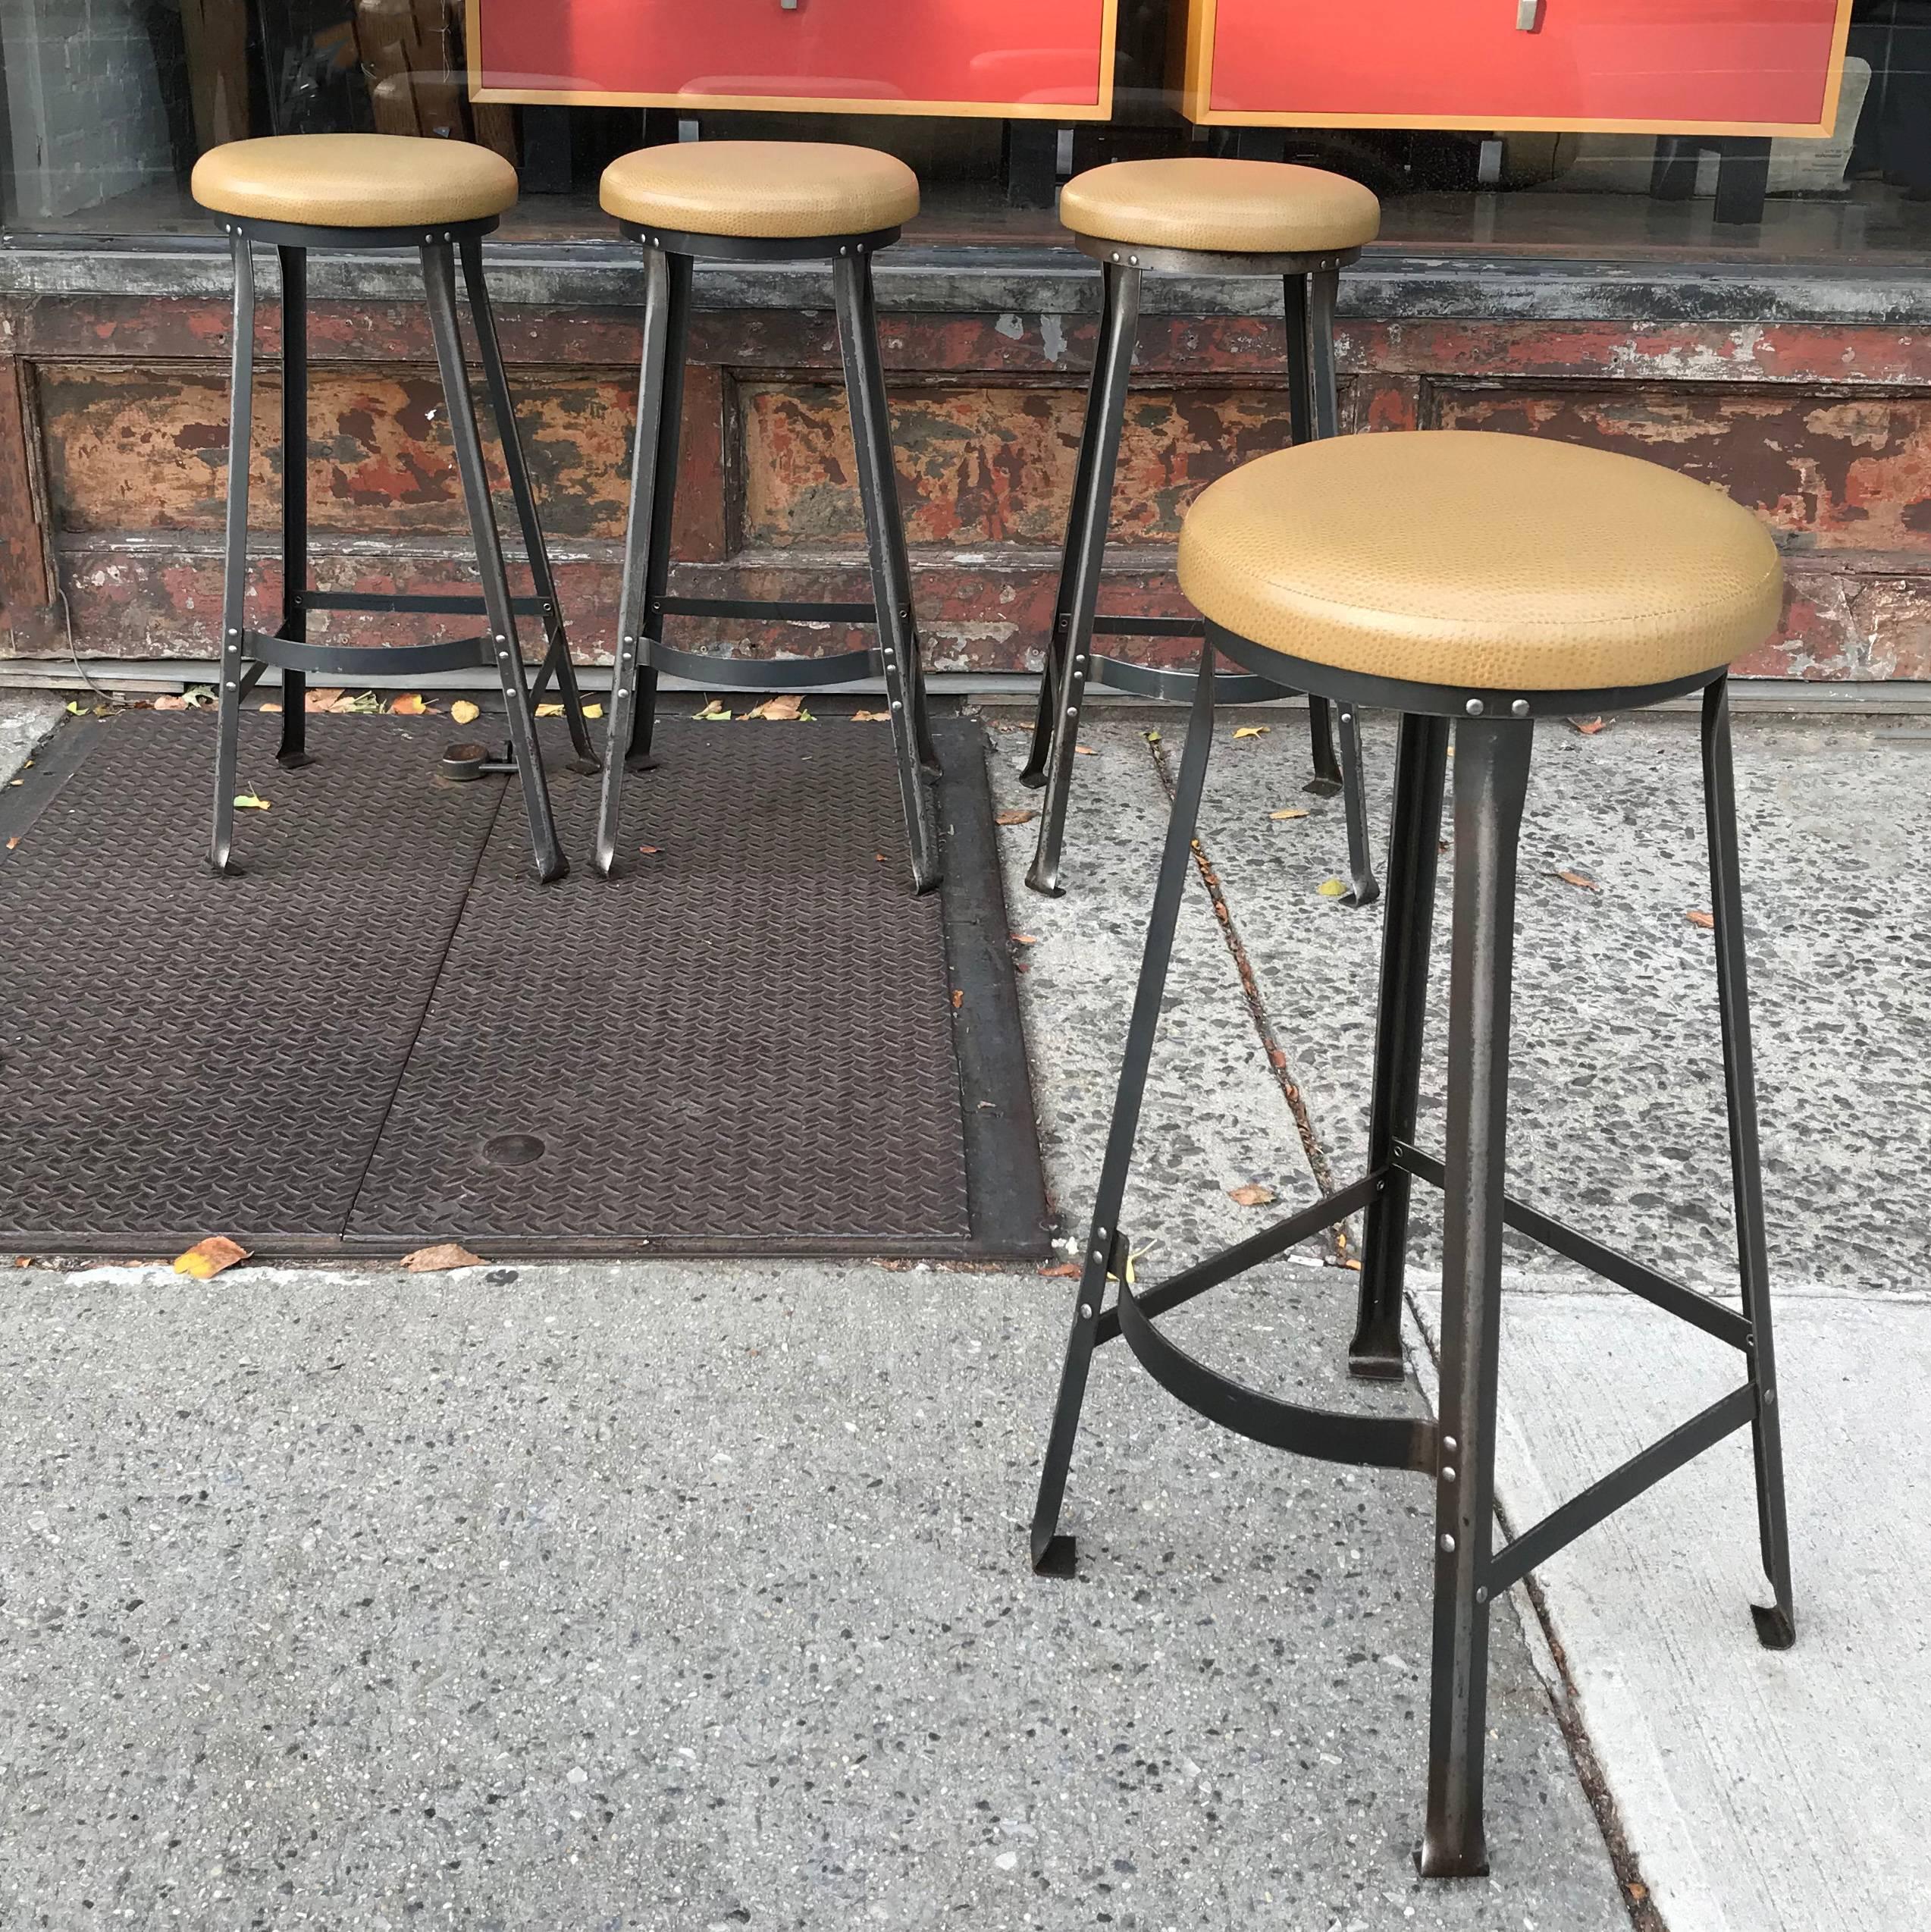 American Industrial Midcentury Angle Iron and Faux Ostrich Barstools